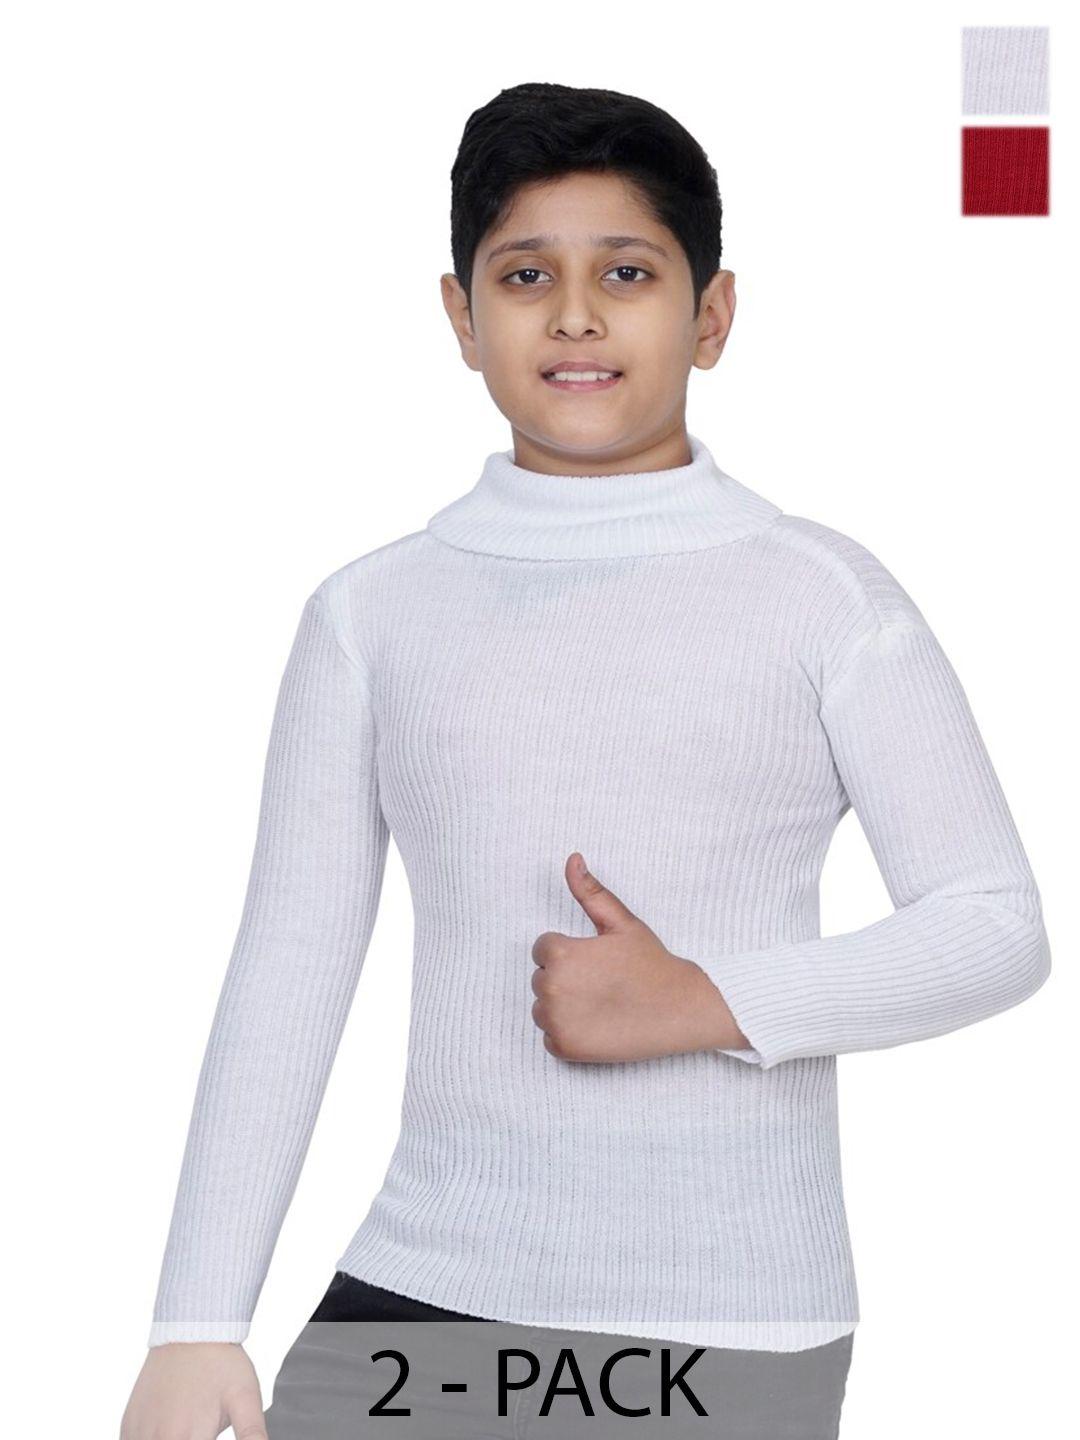 baesd boys woollen pullover with applique detail